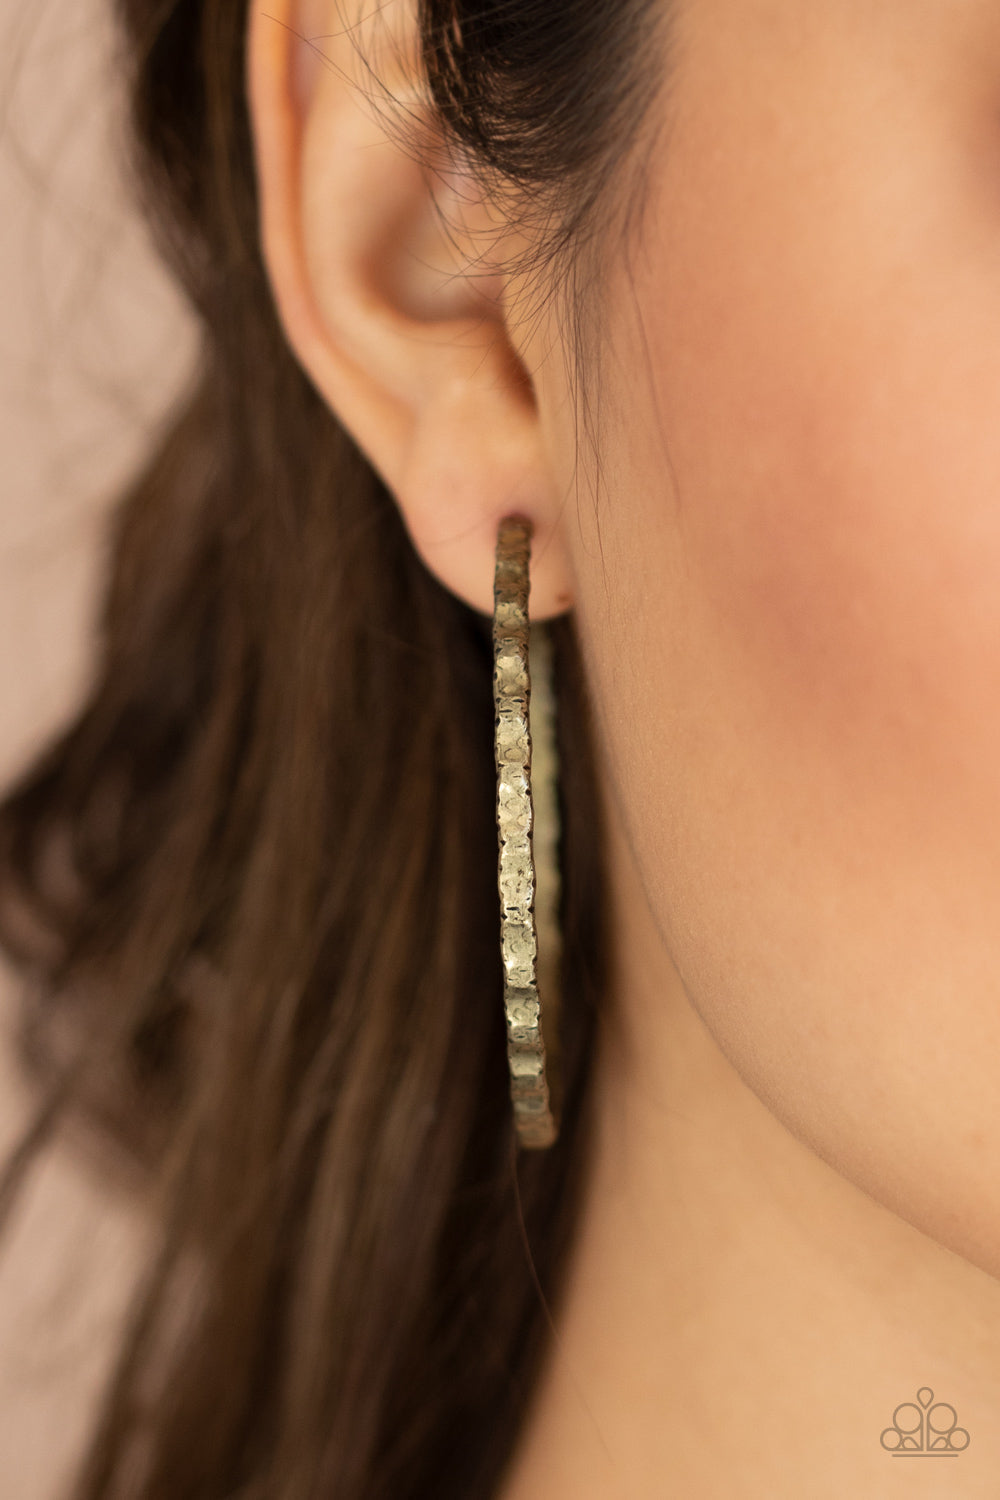 Grungy Grit - Brass Hoop Earrings - Paparazzi Accessories - Brushed in an antiqued finish, a gritty brass hoop is hammered in grungy details for an edgy industrial flair. Earring attaches to a standard post fitting. Hoop measures approximately 2" in diameter. 